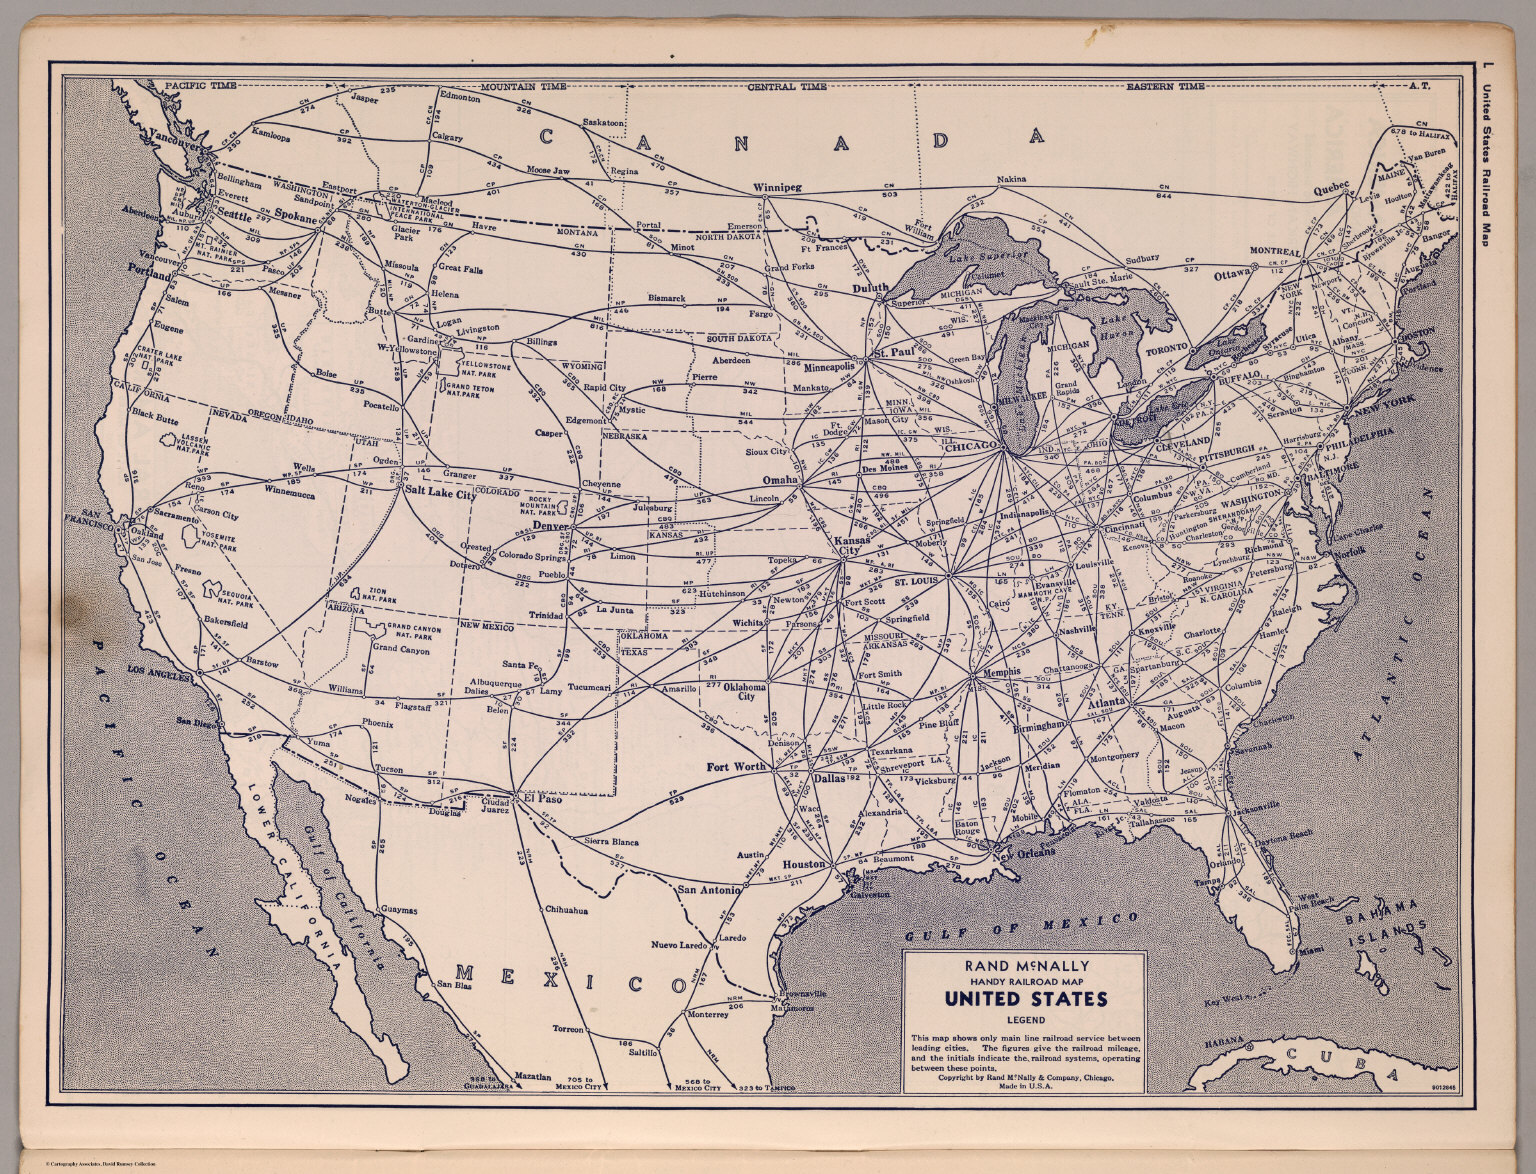 Image of 1940s rail map in the USA